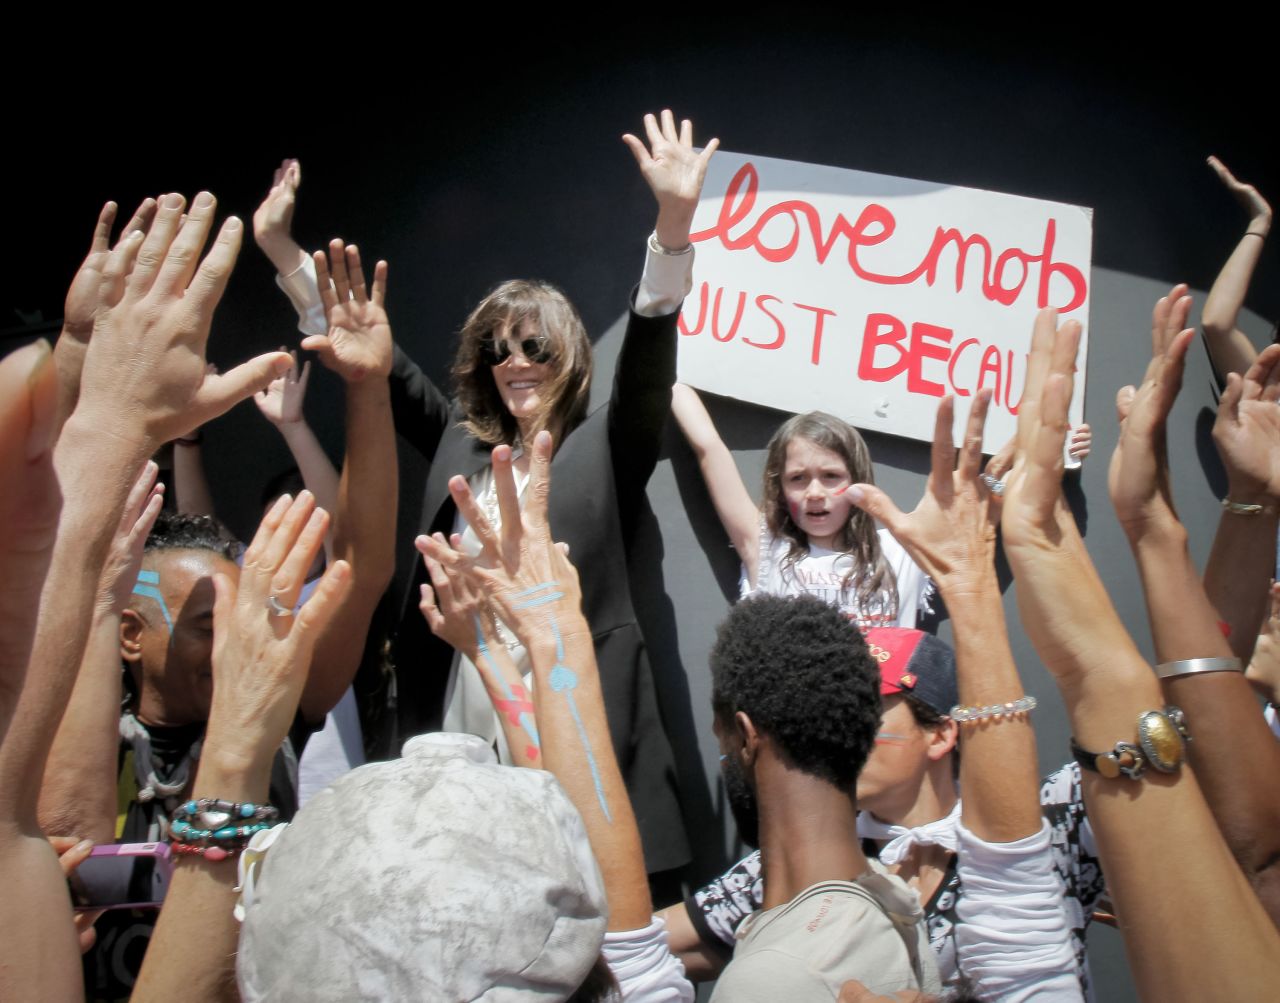 Williamson leads a "love mob" campaign rally in May 2014.